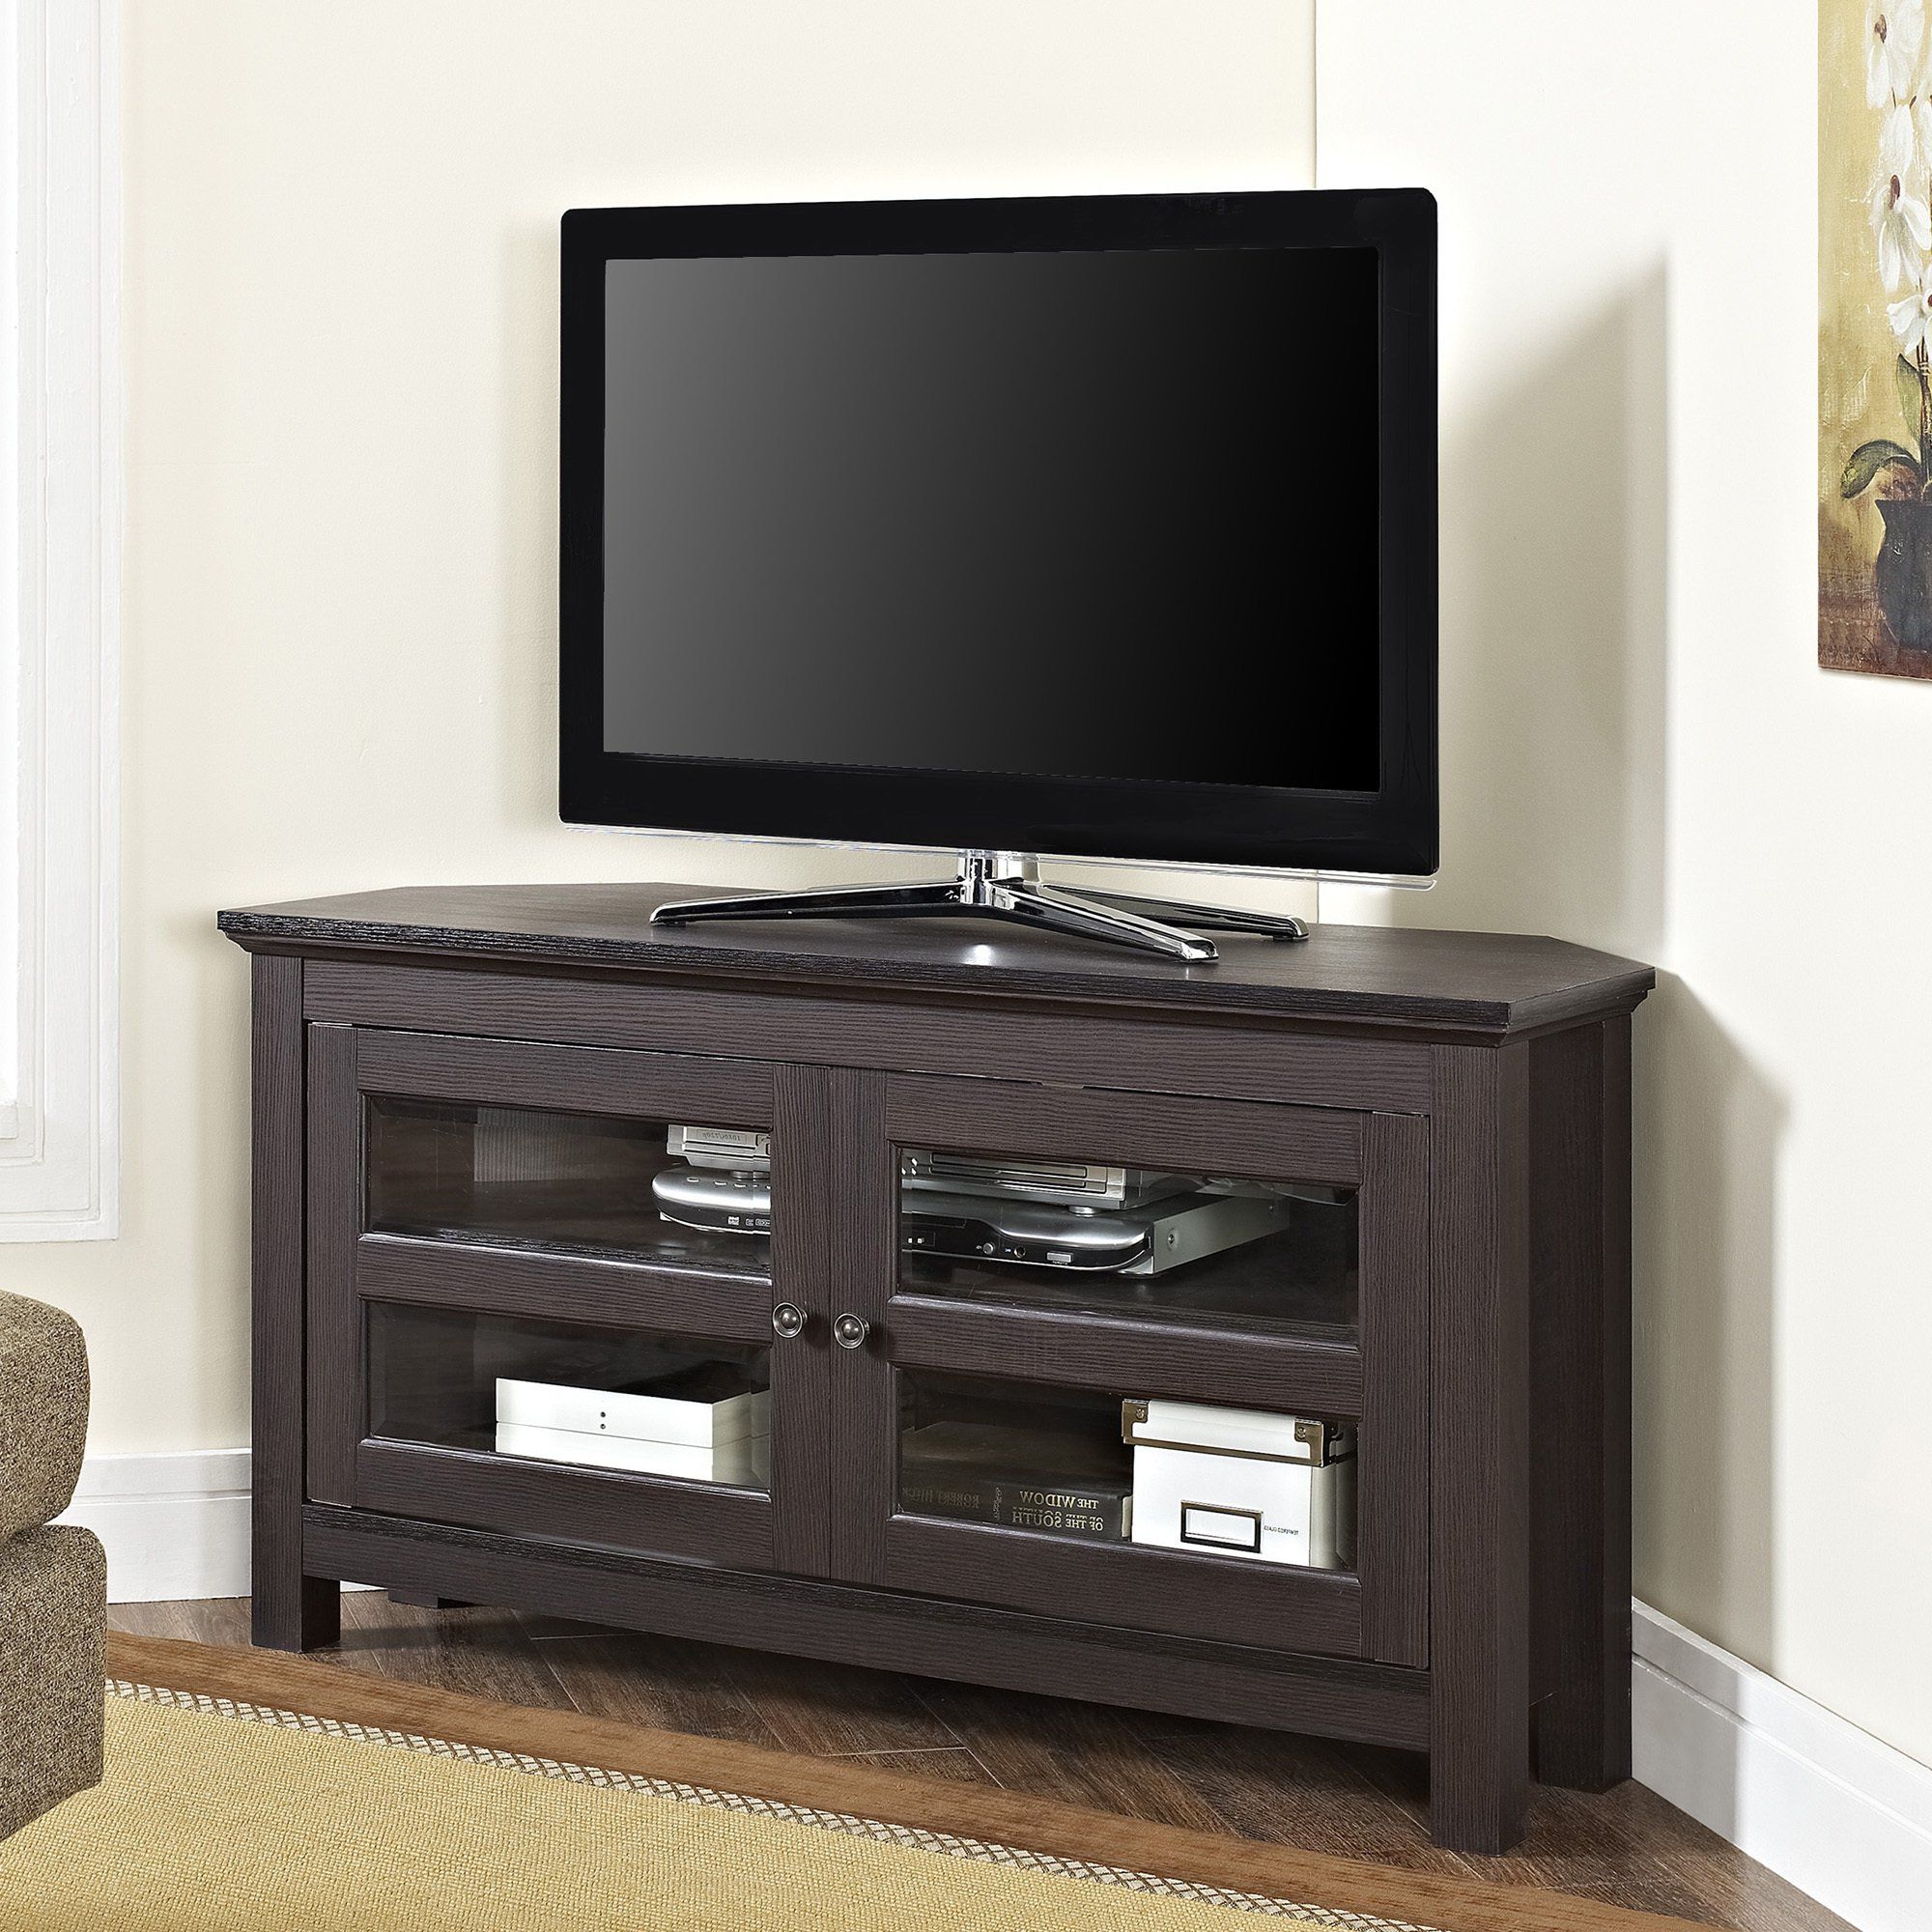 Latest Corner Tv Cabinets For Flat Screens With Doors Within Shop Espresso Wood 44 Inch Corner Tv Stand – Free Shipping On Orders (Photo 17 of 20)